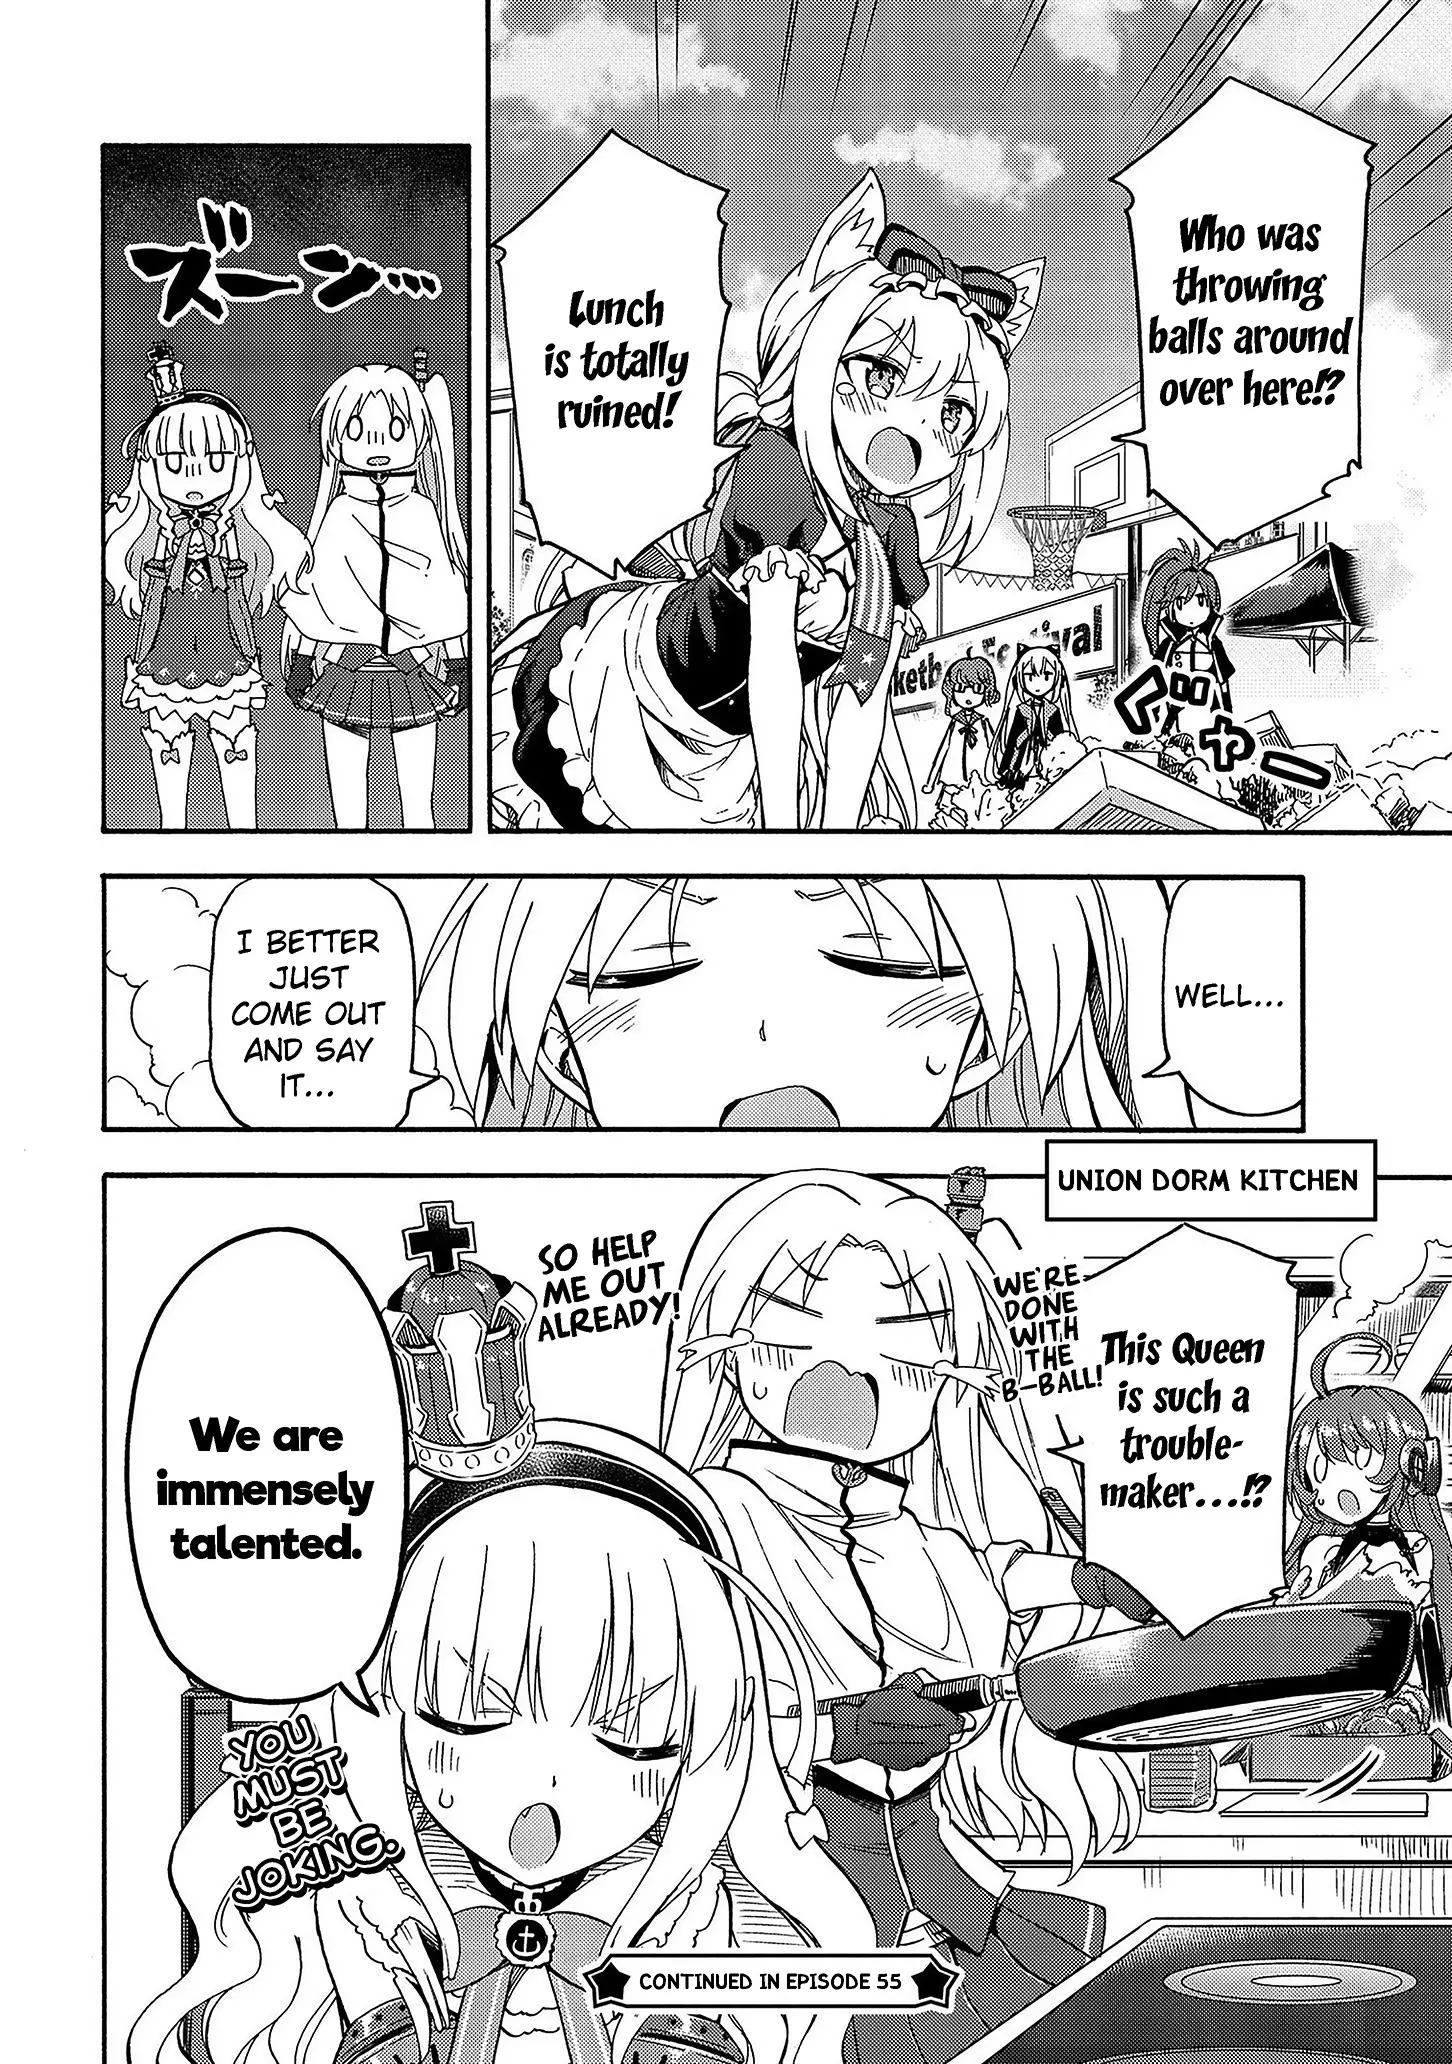 Azur Lane: Queen's Orders - 54 page 4-3c3862f5